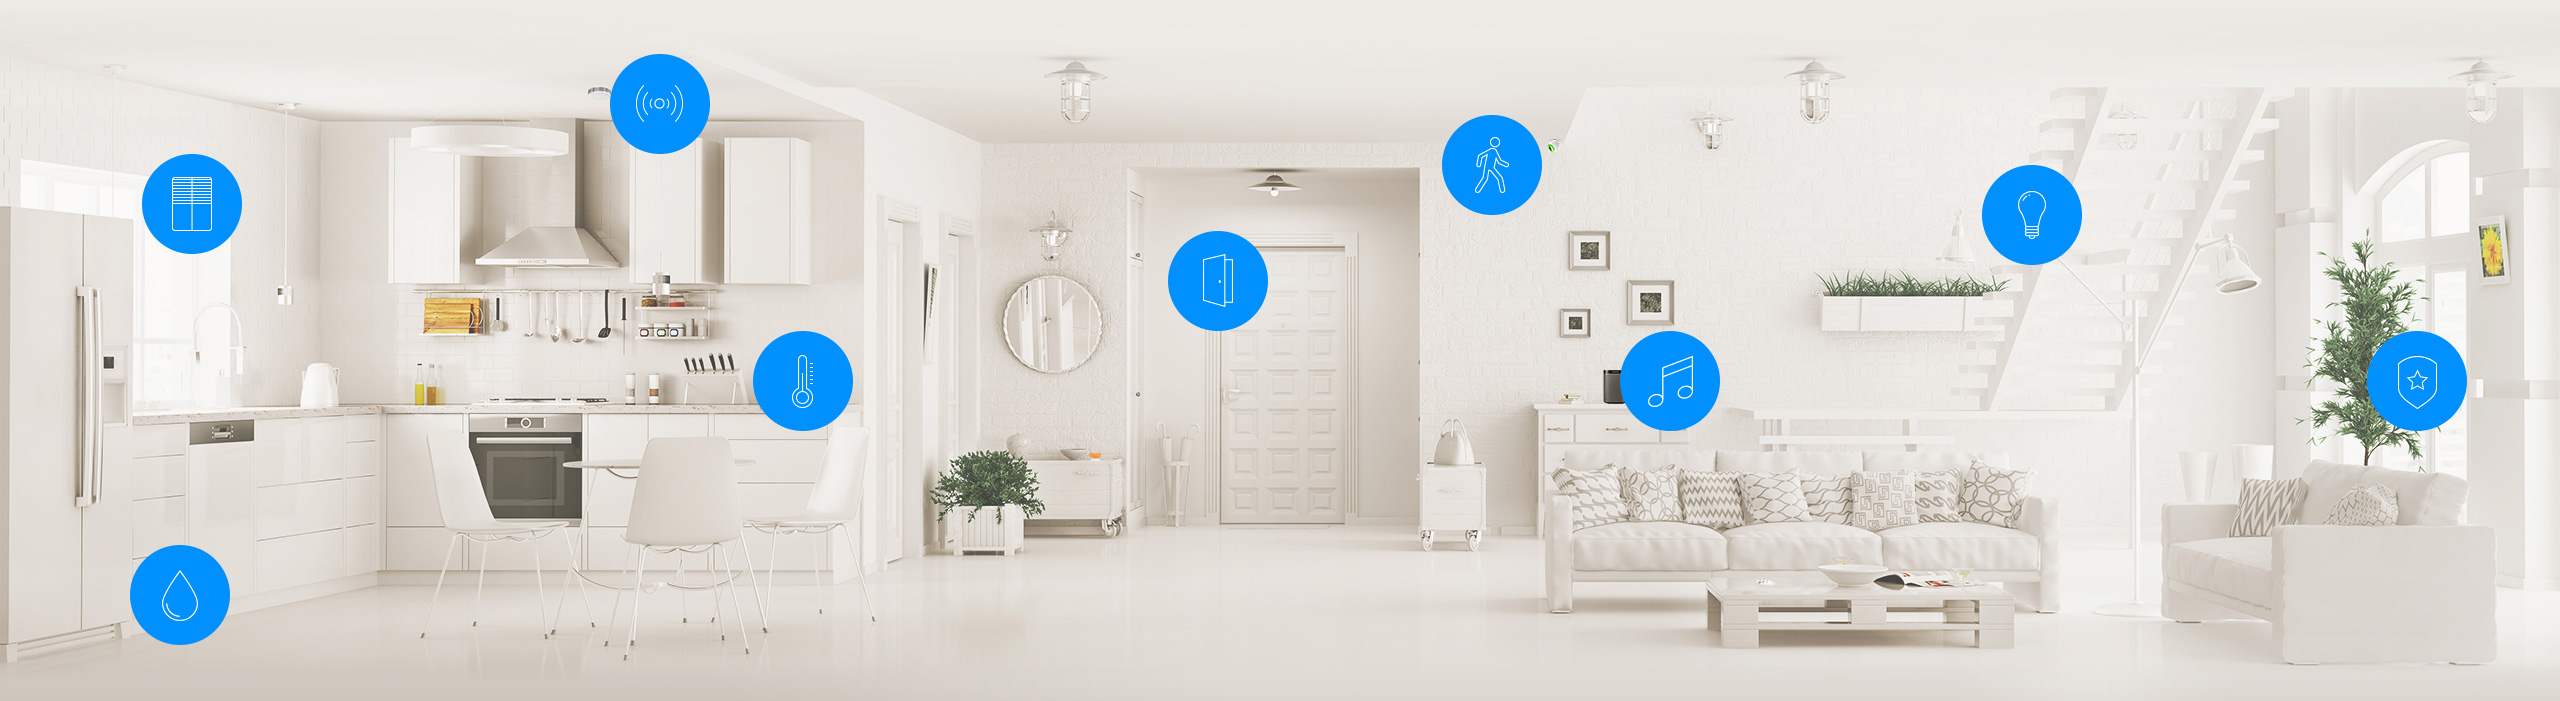 Your Home by Fibaro